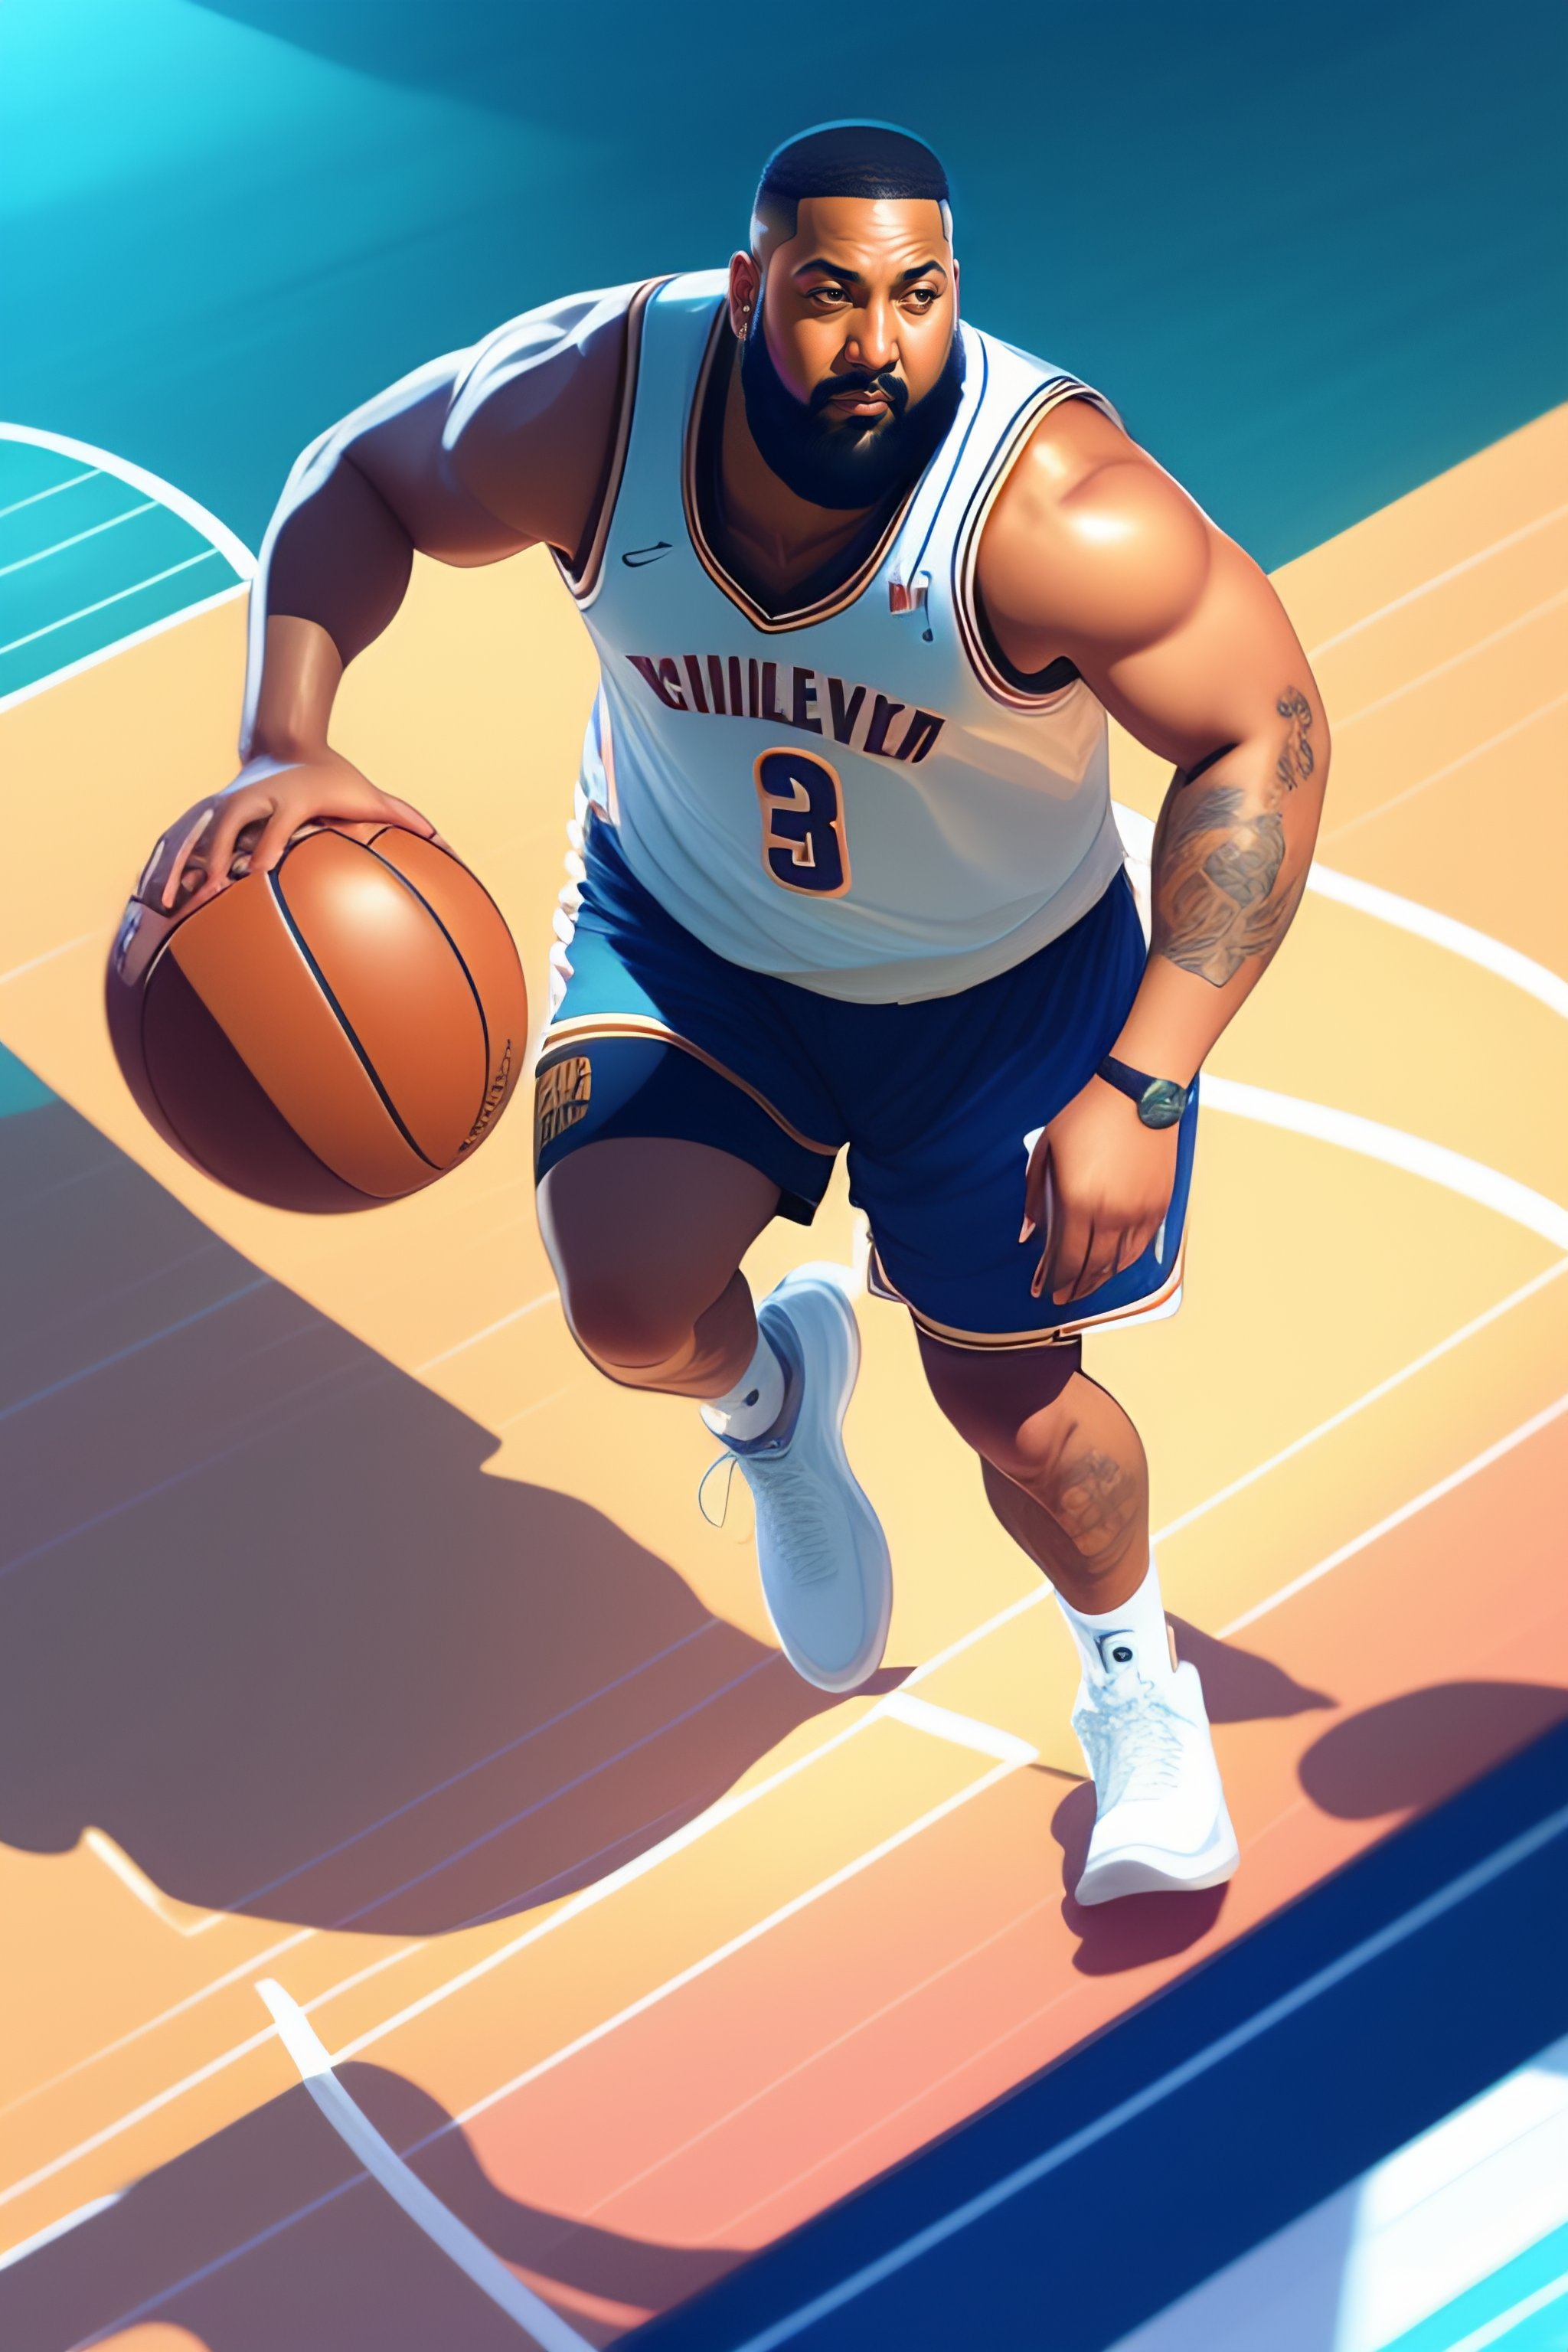 Lexica - Full body, from above, DJ Khaled playing basketball, ice